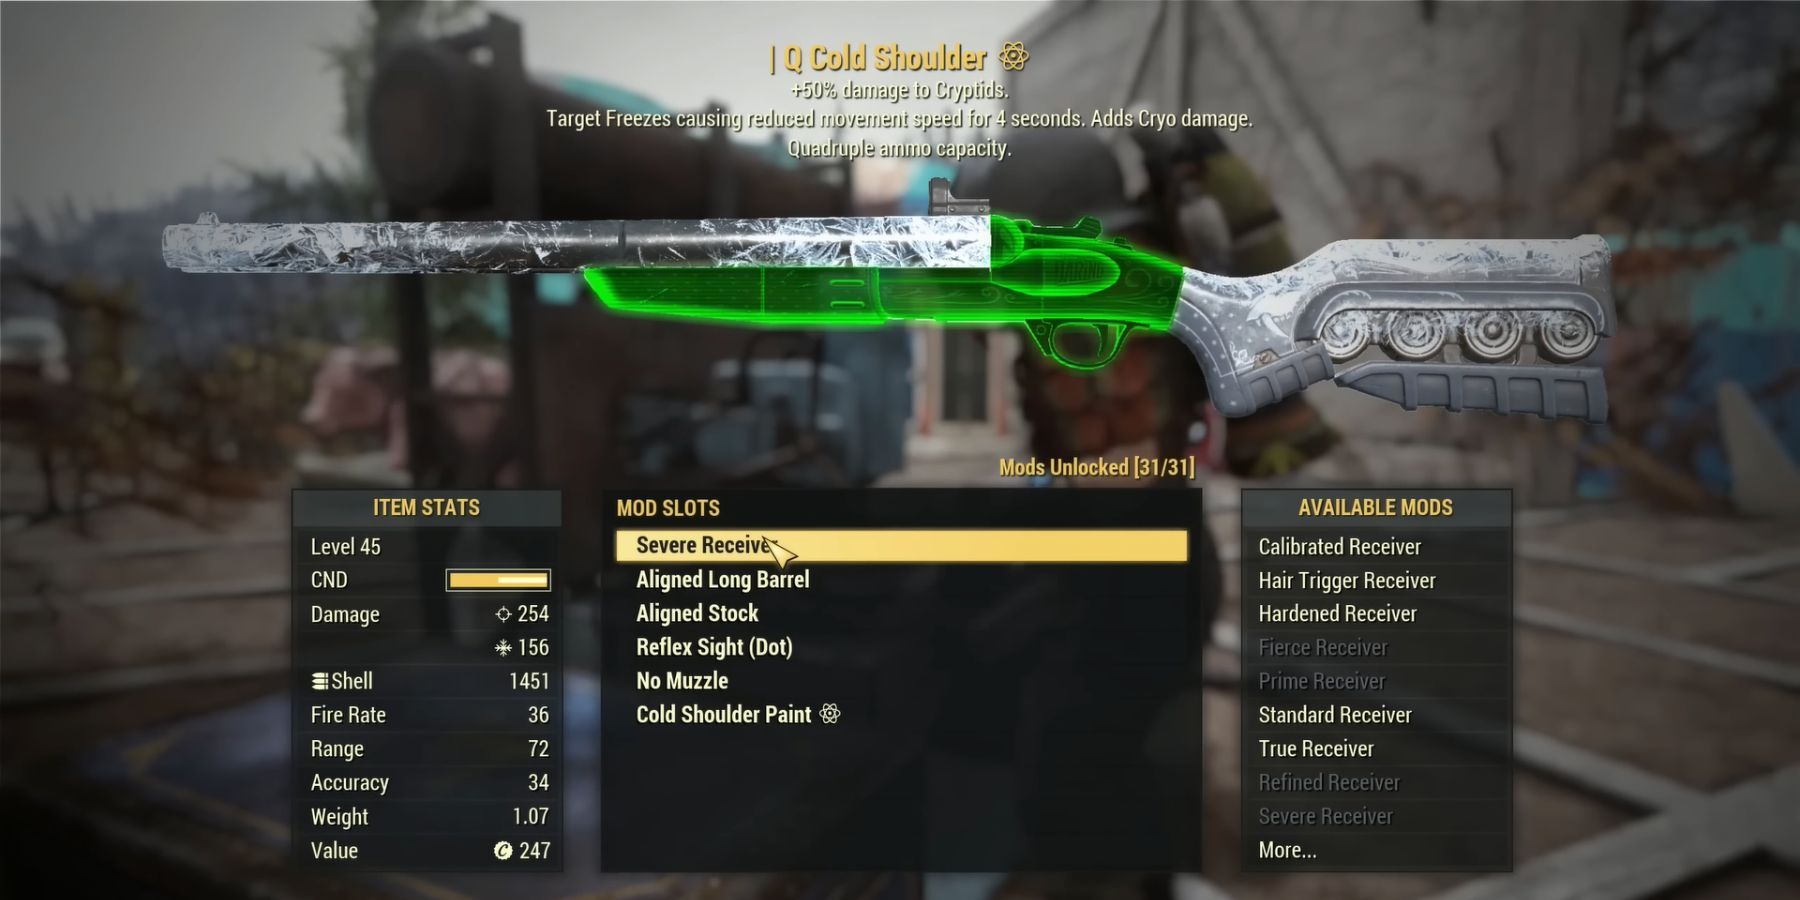 image showing the best mods for the cold shoulder shotgun in fallout 76.